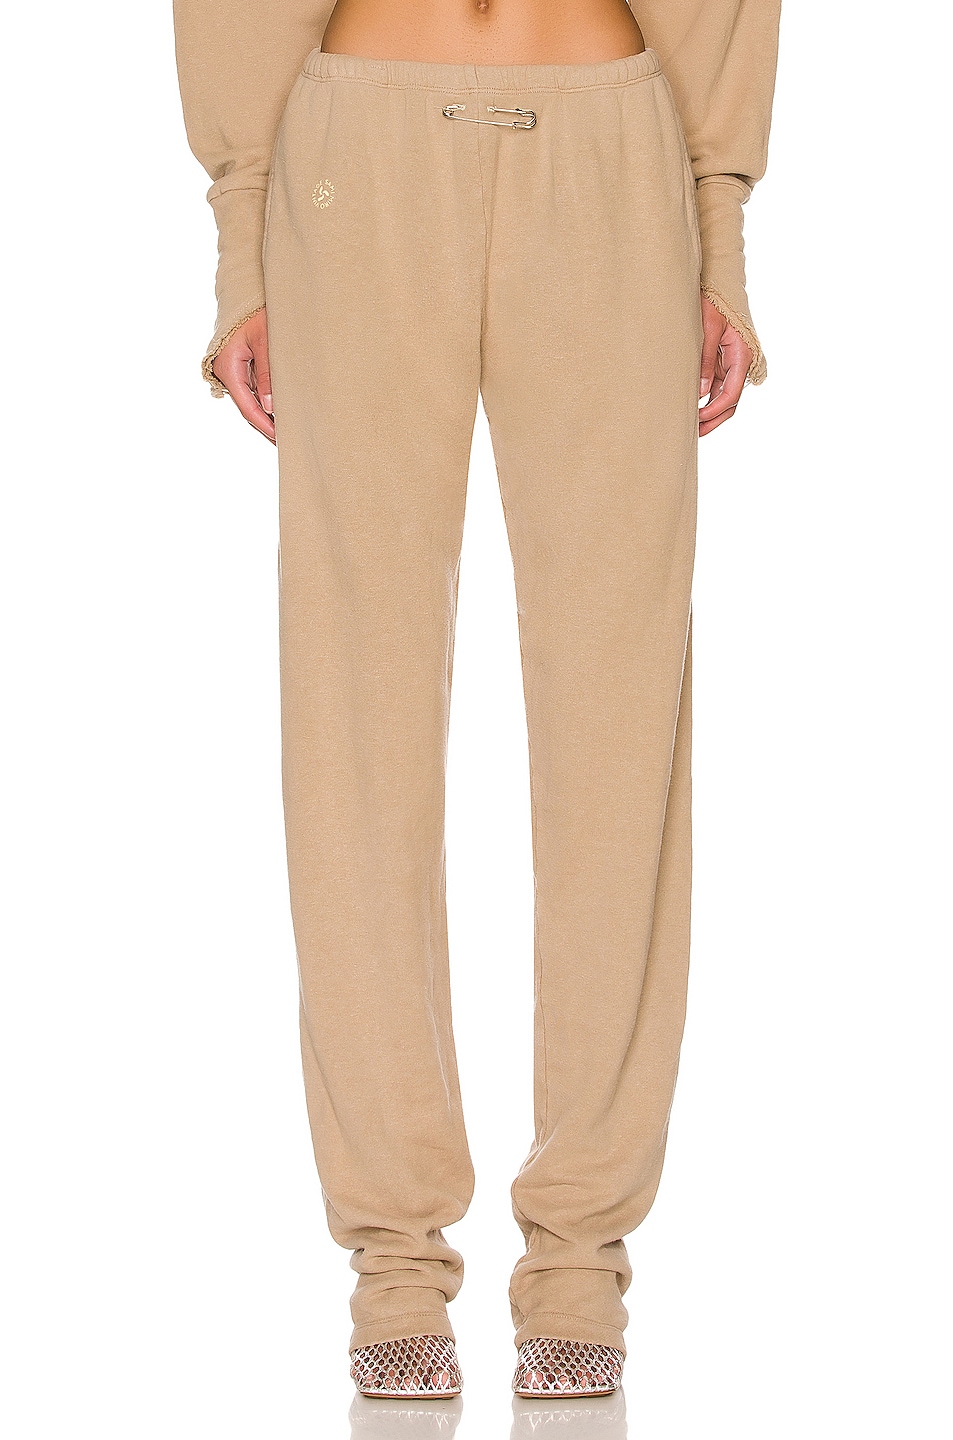 Safety Pin Sweatpant in Taupe